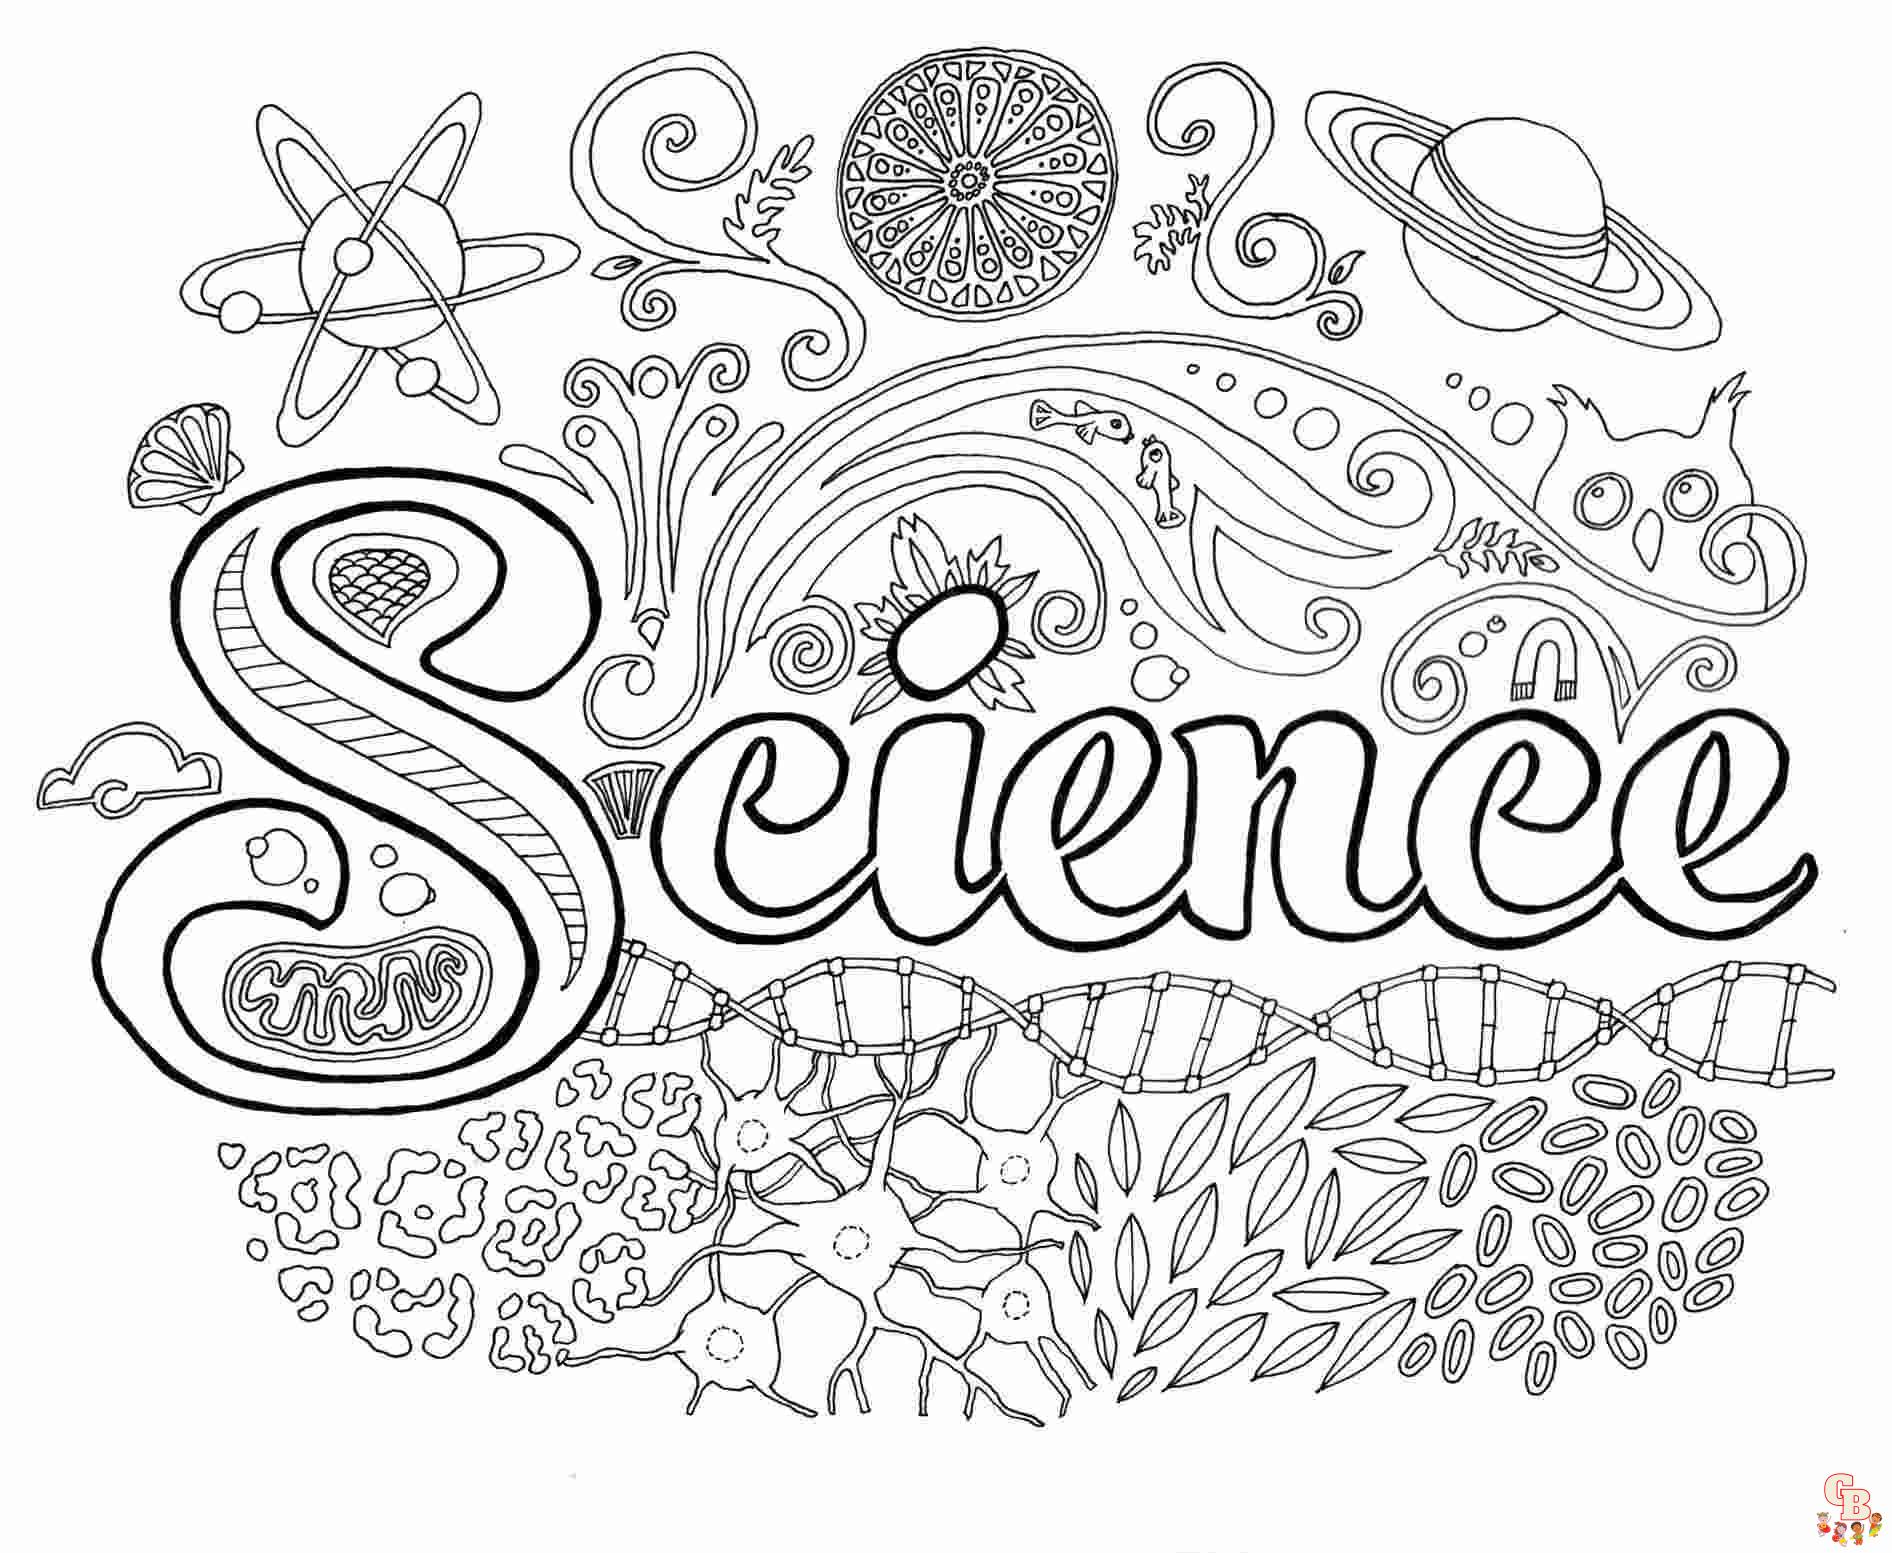 Biology coloring pages printable